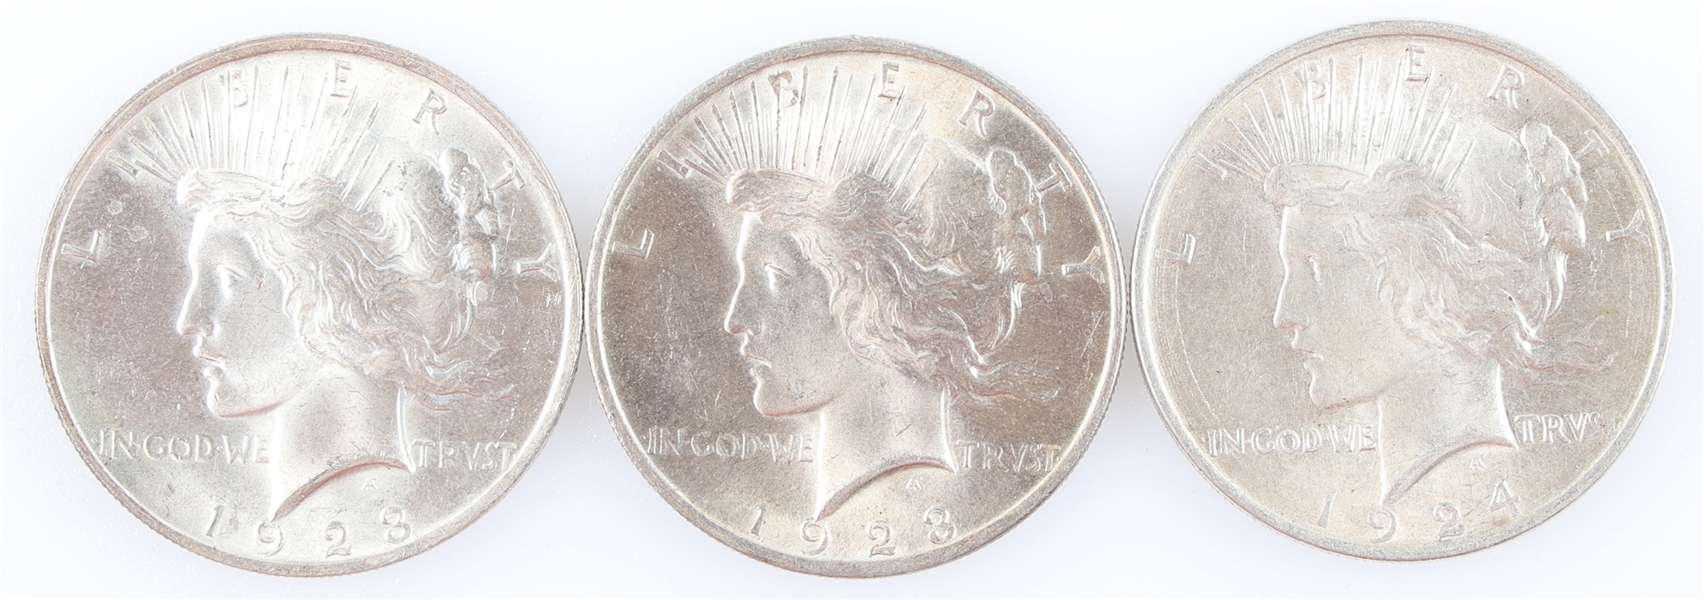 1923 & 1924 US SILVER PEACE DOLLAR COINS - LOT OF 3